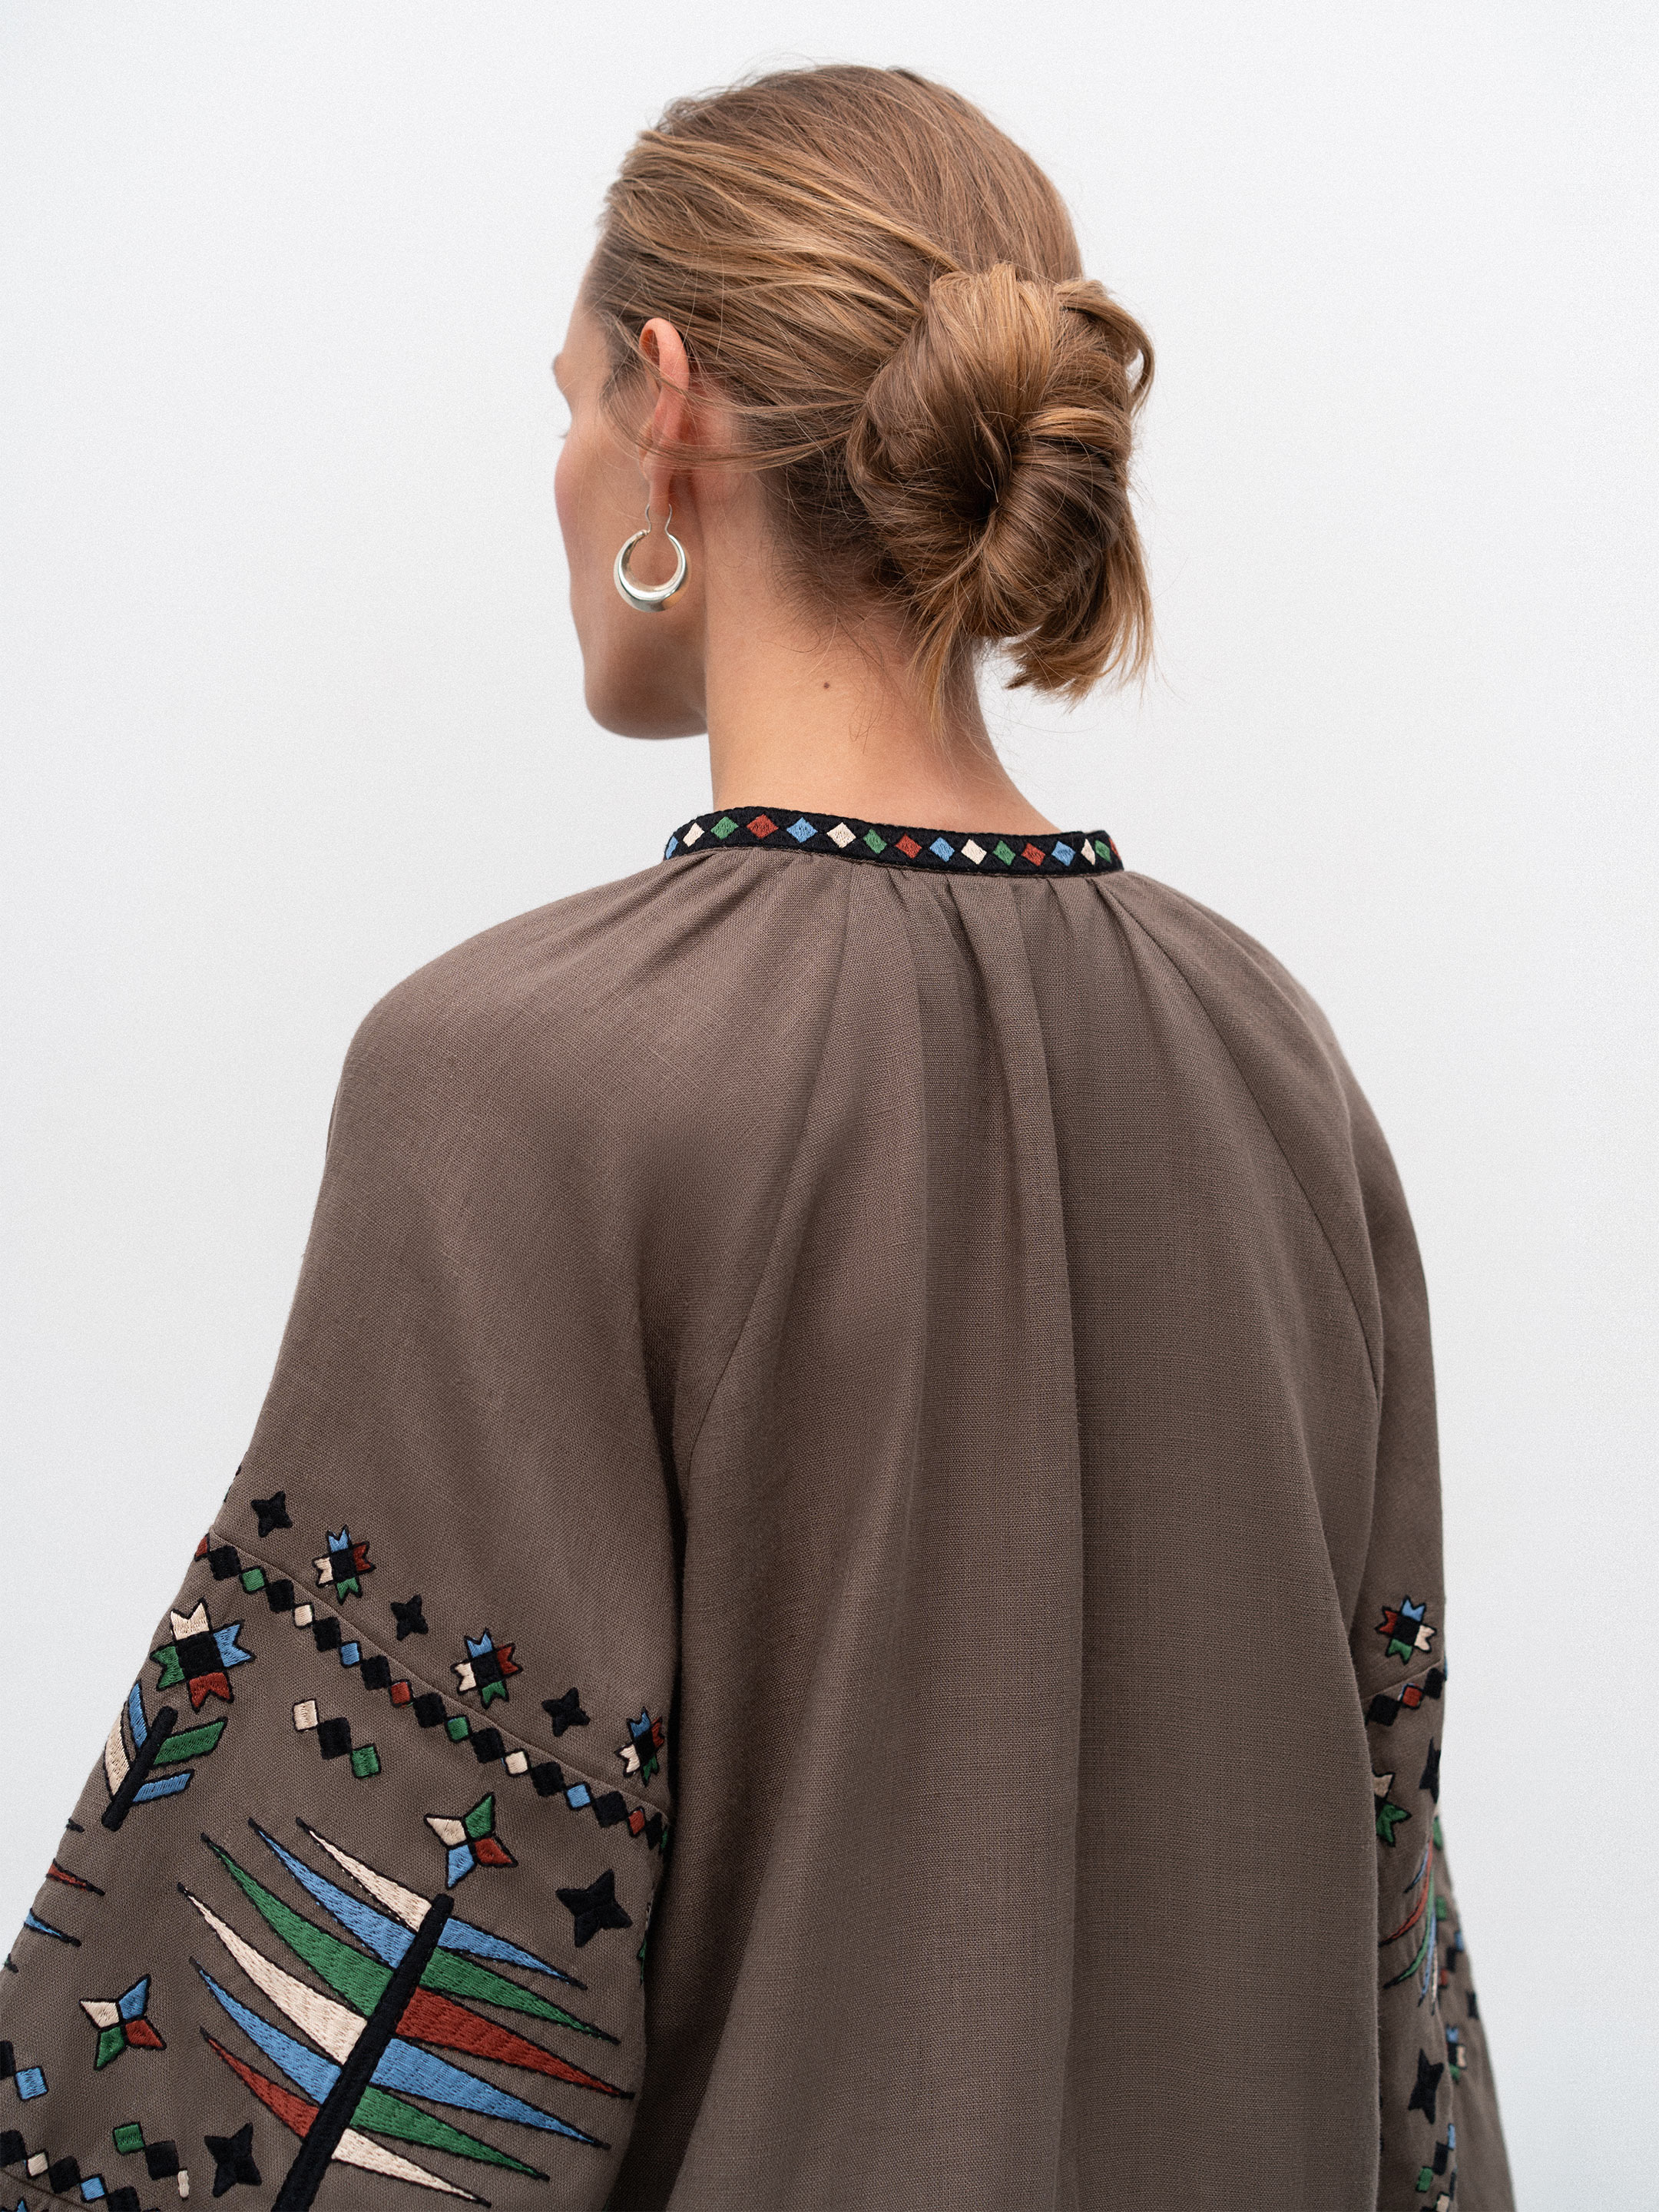 Women's embroidered shirt with geometric embroidery Melanka Temna - photo 2